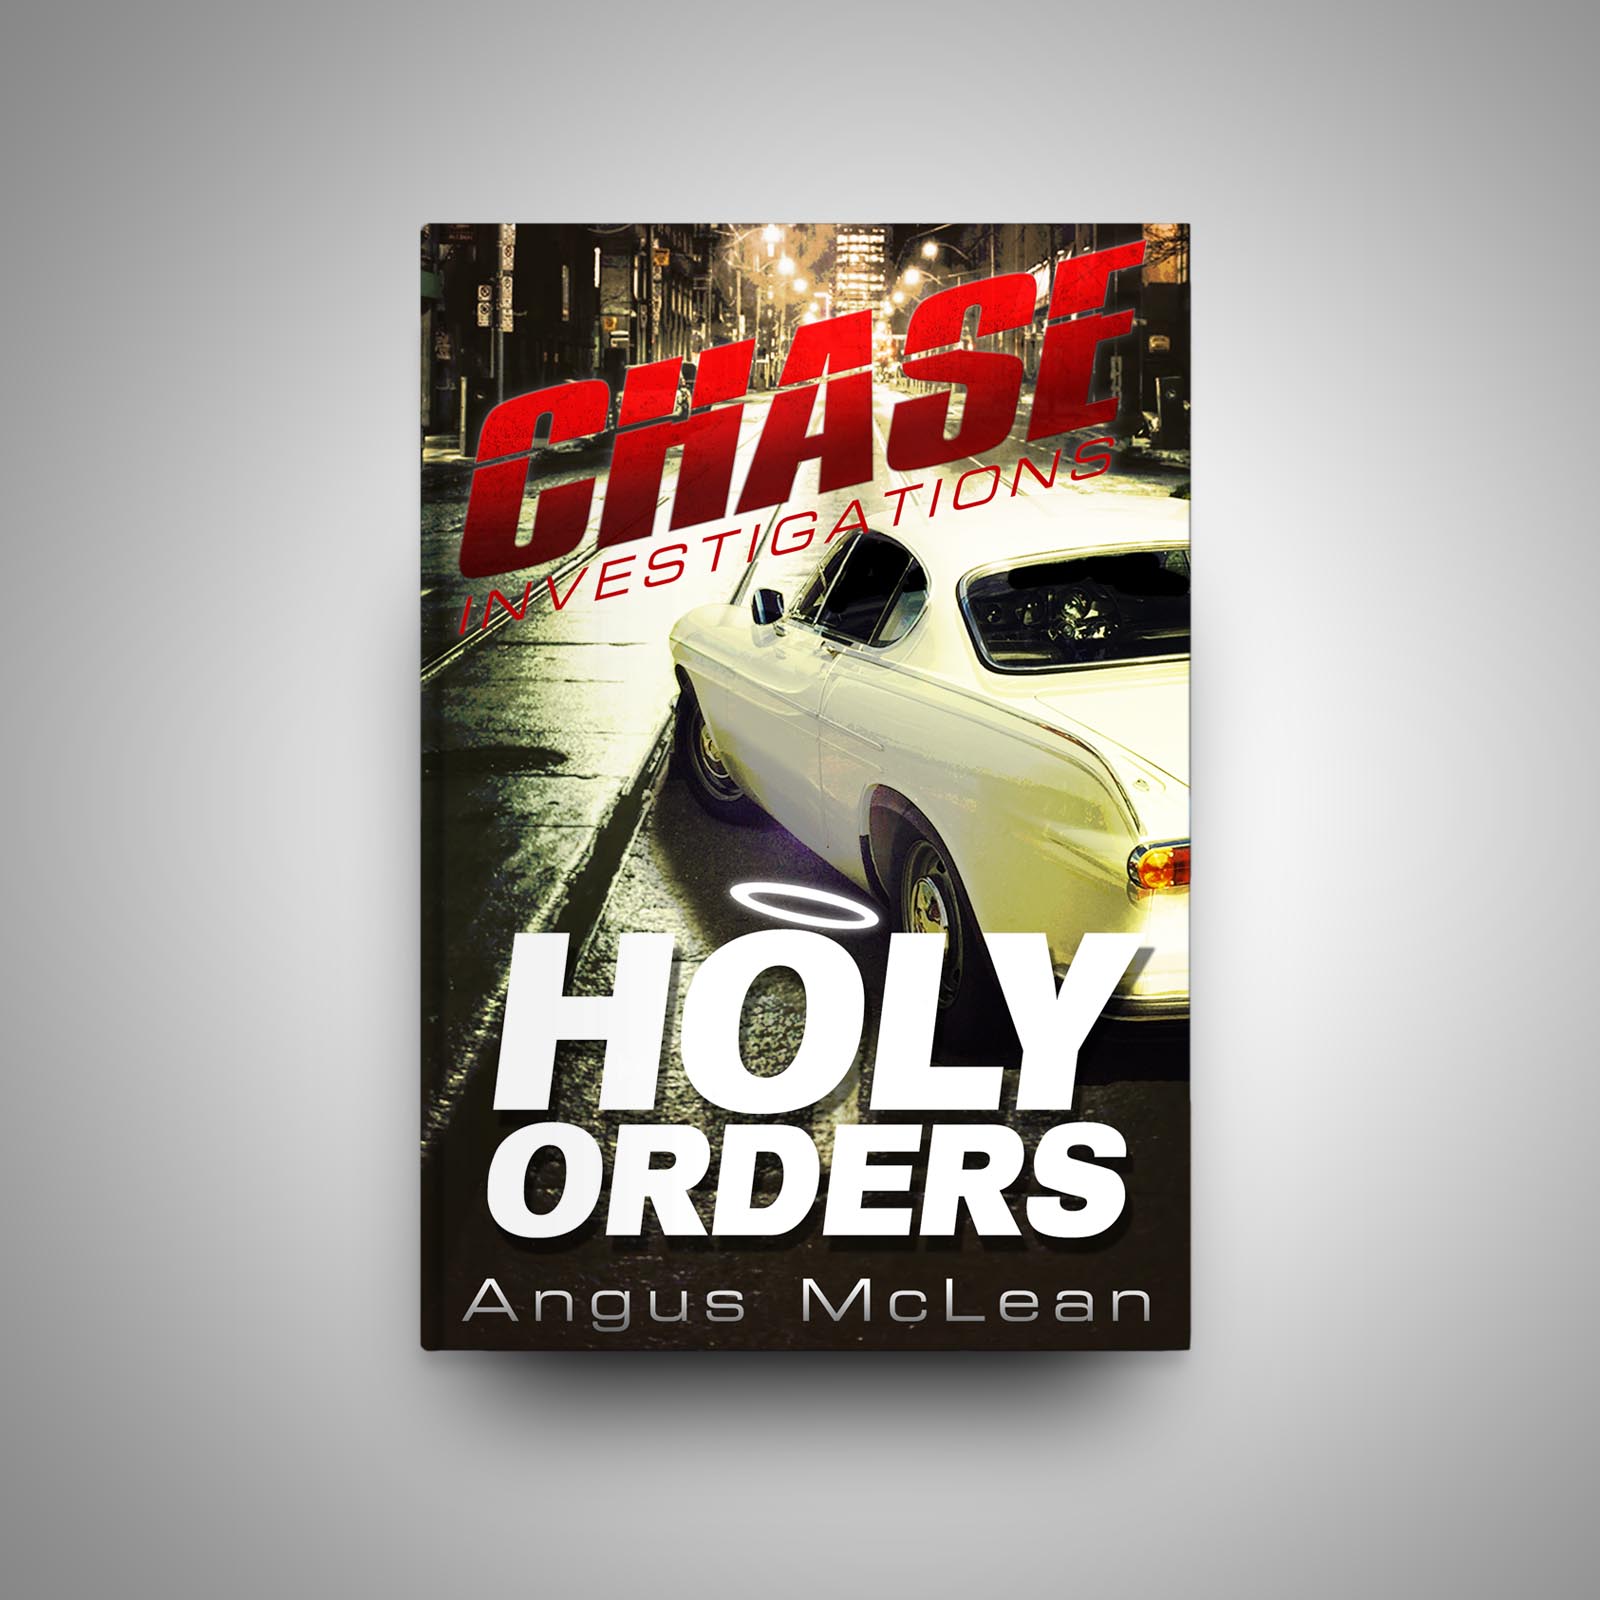 Angus McLean Chase Investigations Holy Orders ebook Crime Novel